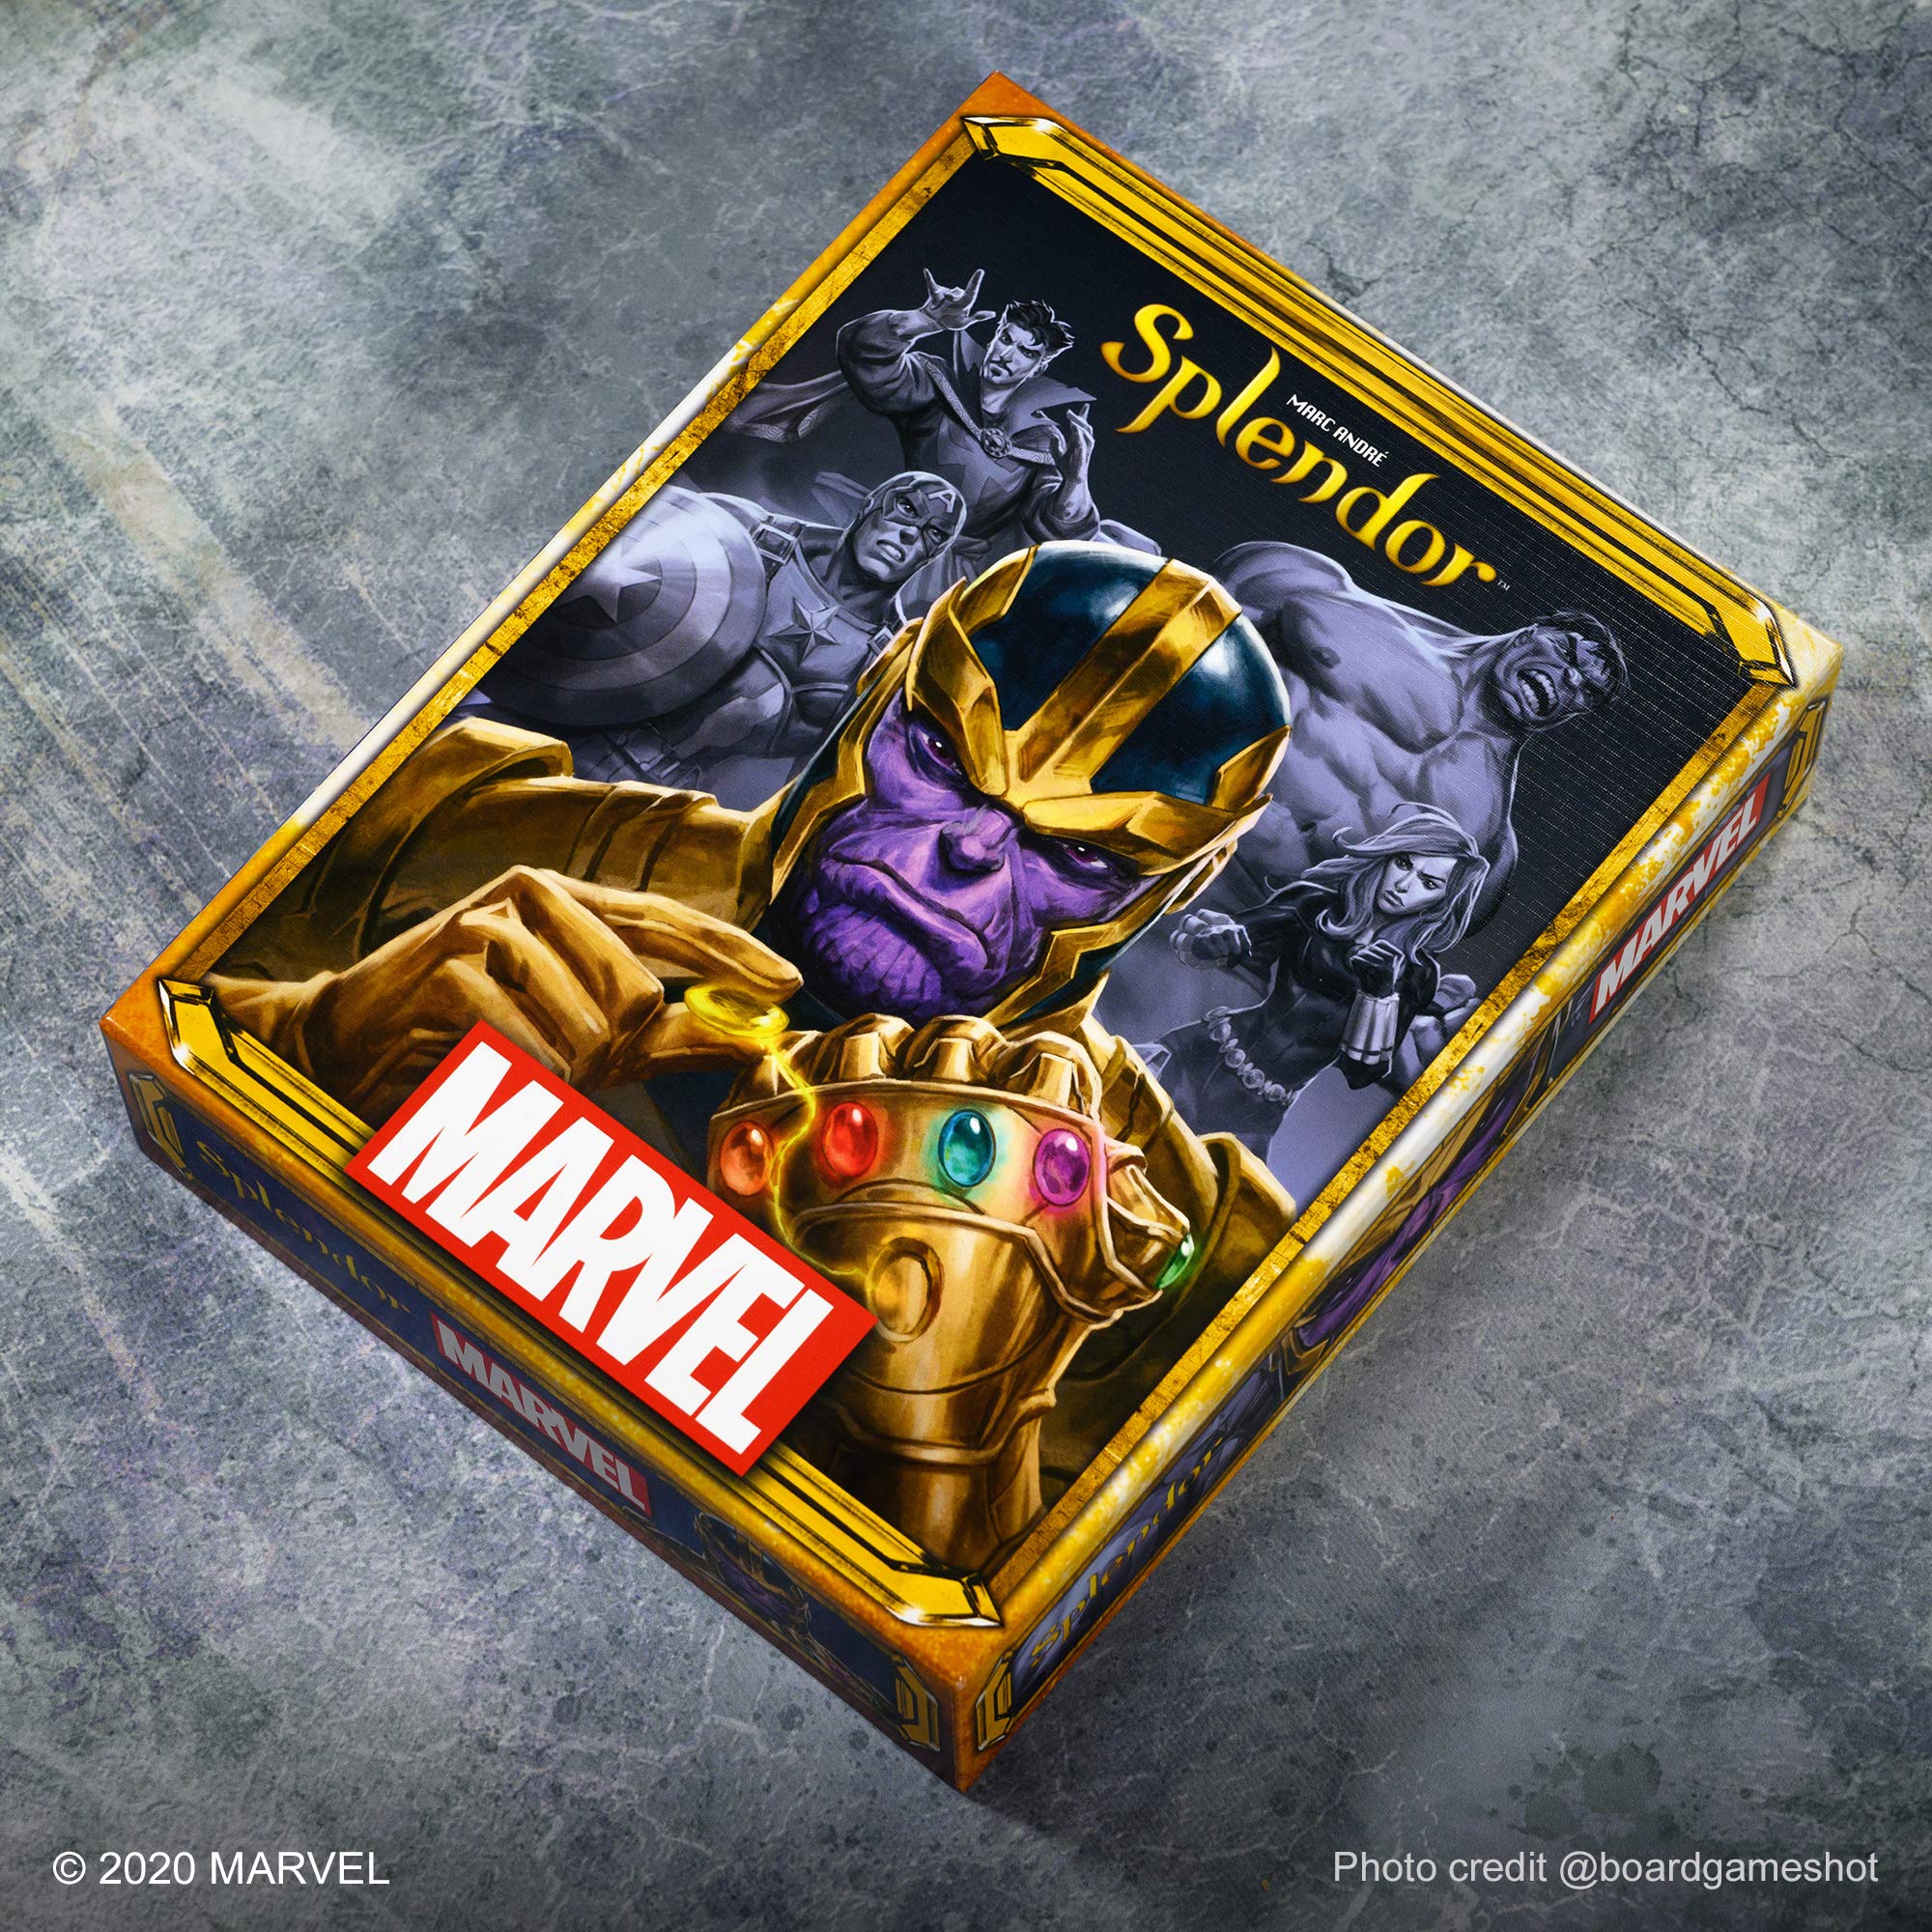 Marvel Splendor Board Game - Strategy Game for Kids and Adults, Fun Family Game Night Entertainment, Ages 10+, 2-4 Players, 30-Minute Playtime, Made by Space Cowboys